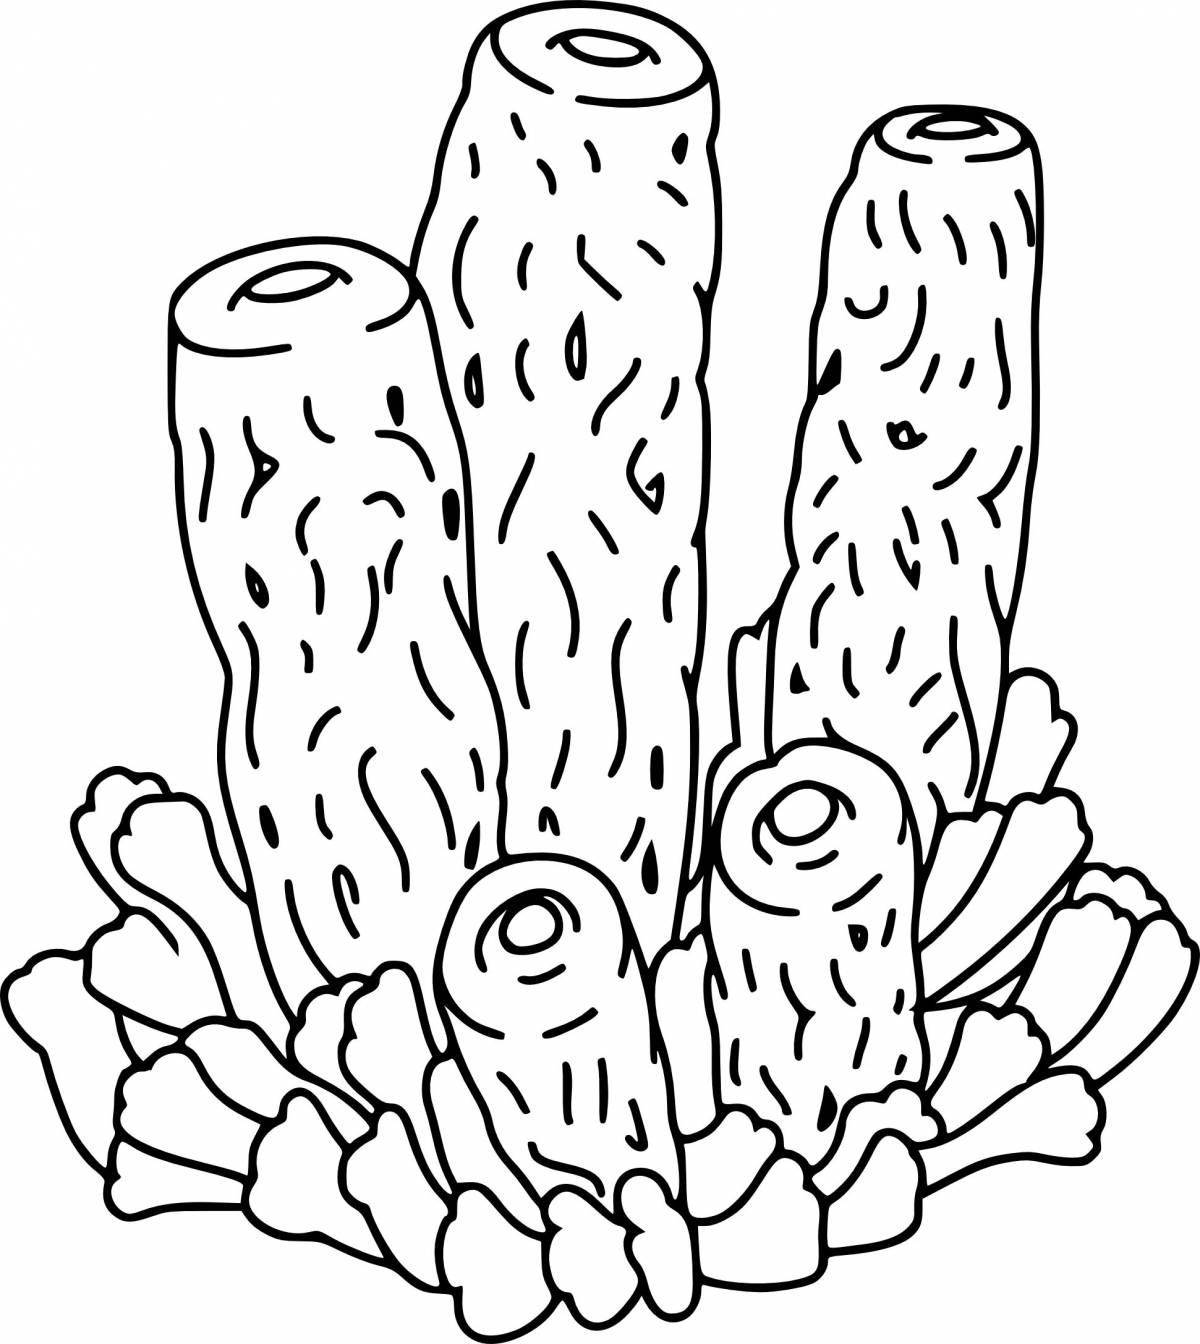 Fun coral coloring book for kids